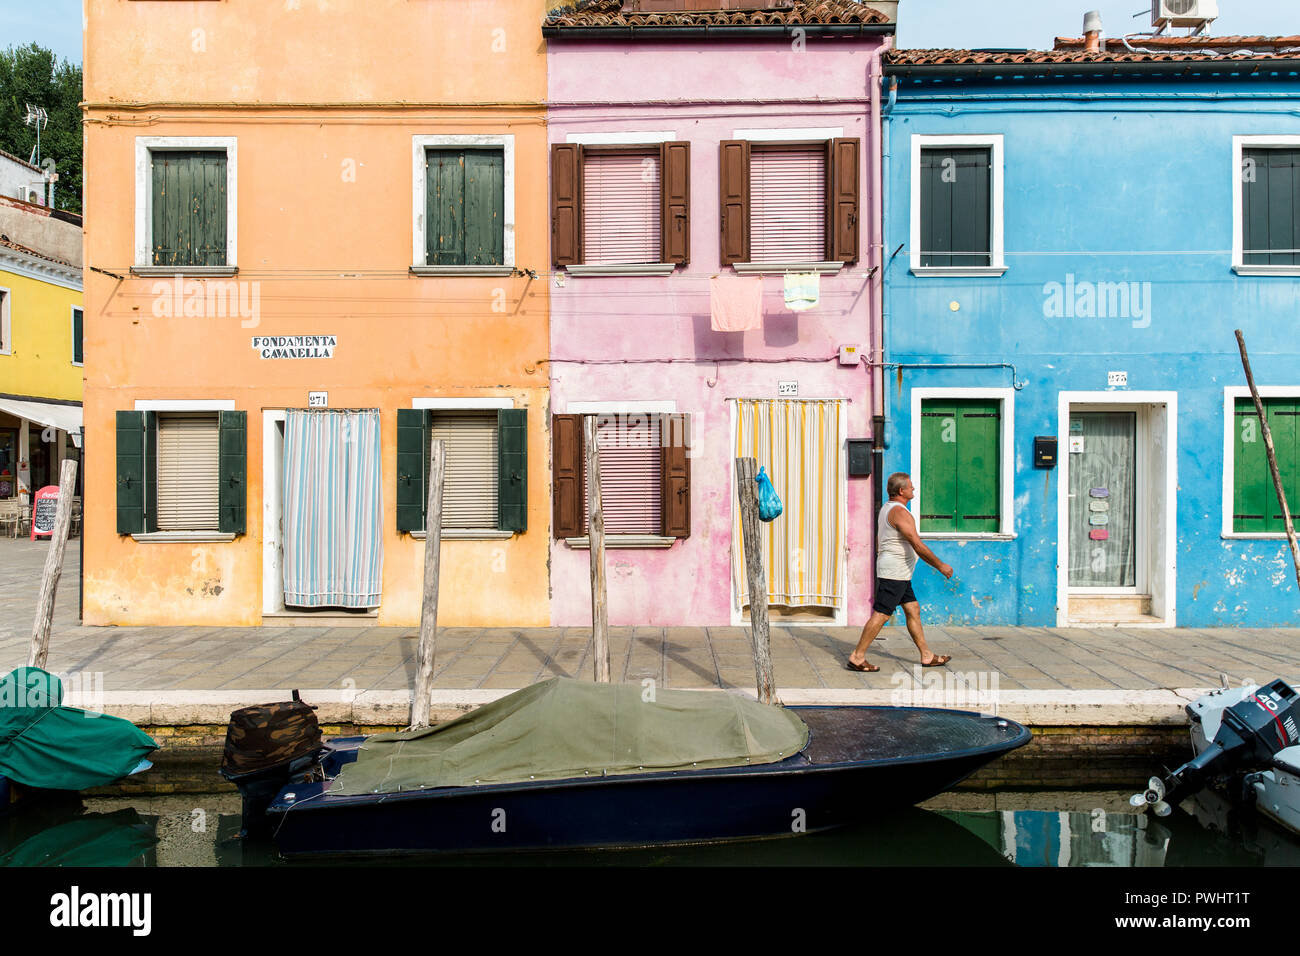 A man walks past a row of colourful houses by the canal in Burano, Venice, Italy Stock Photo